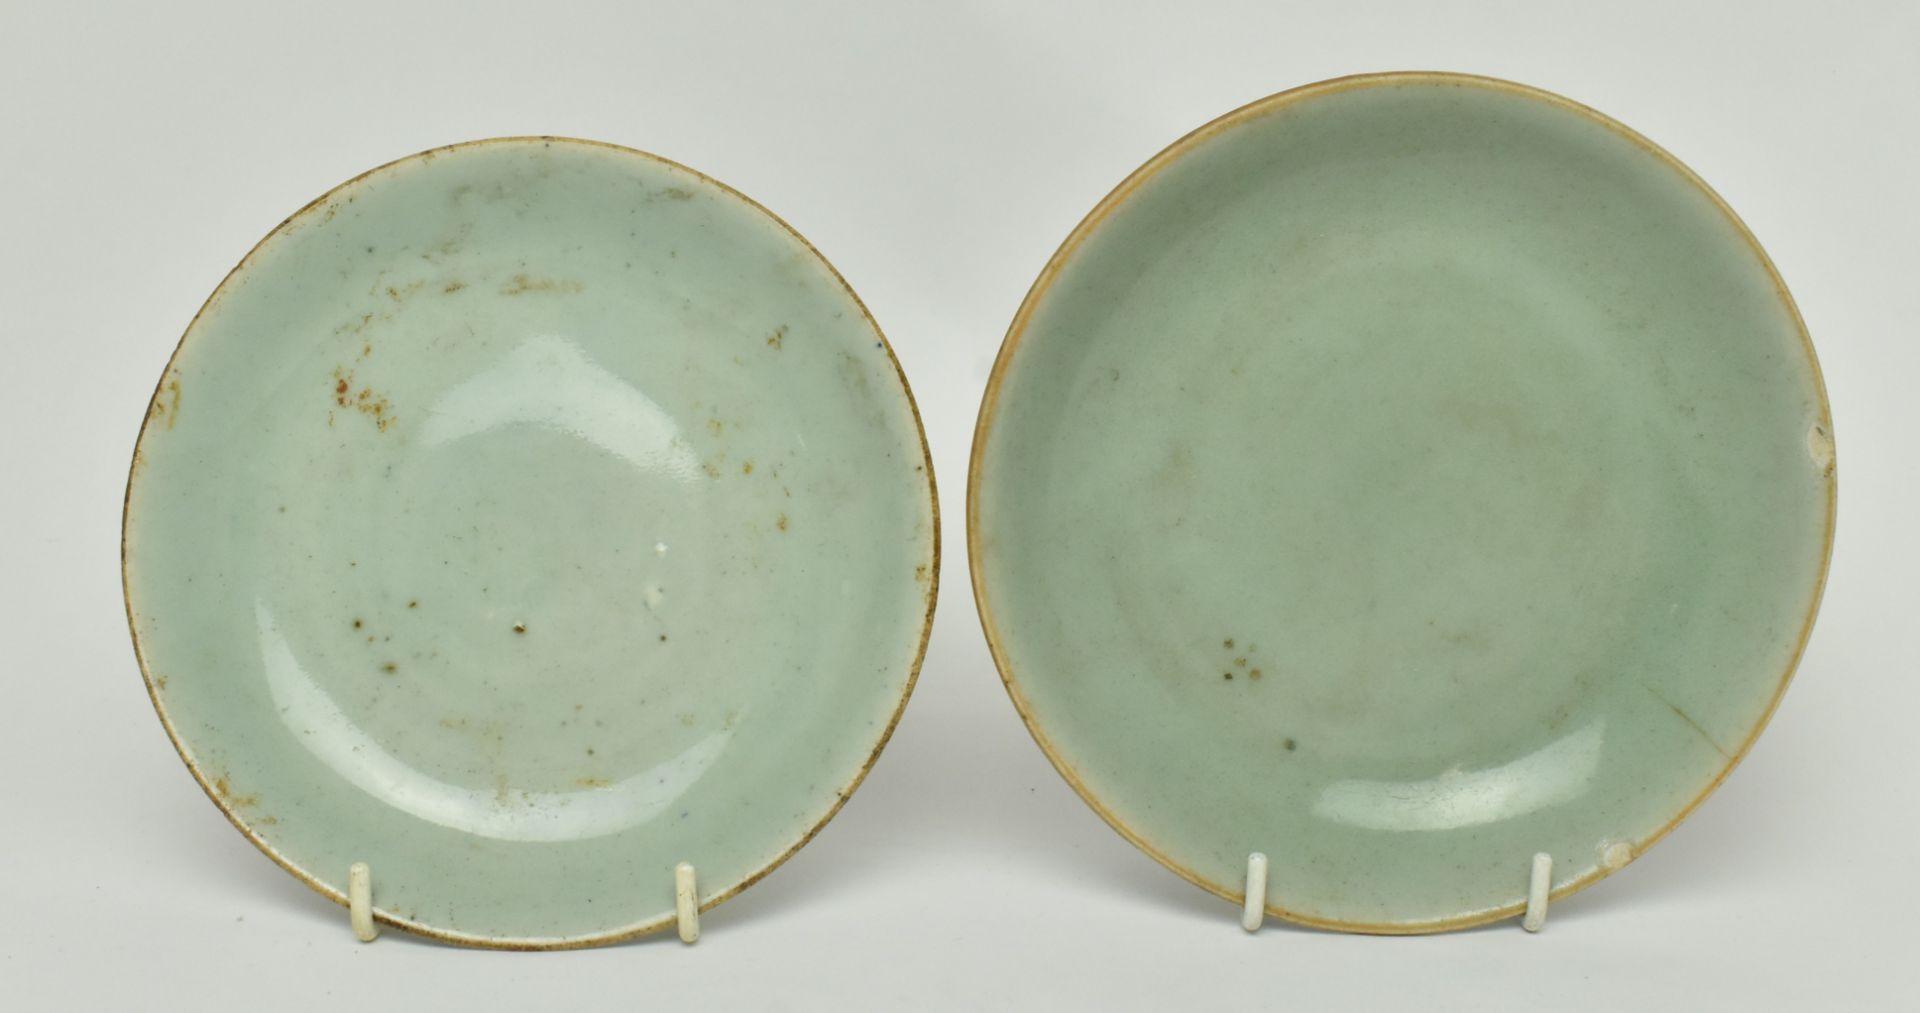 TWO QING DYNASTY CELADON GLAZED DISHES 清 青釉 盘子两个 - Image 2 of 7